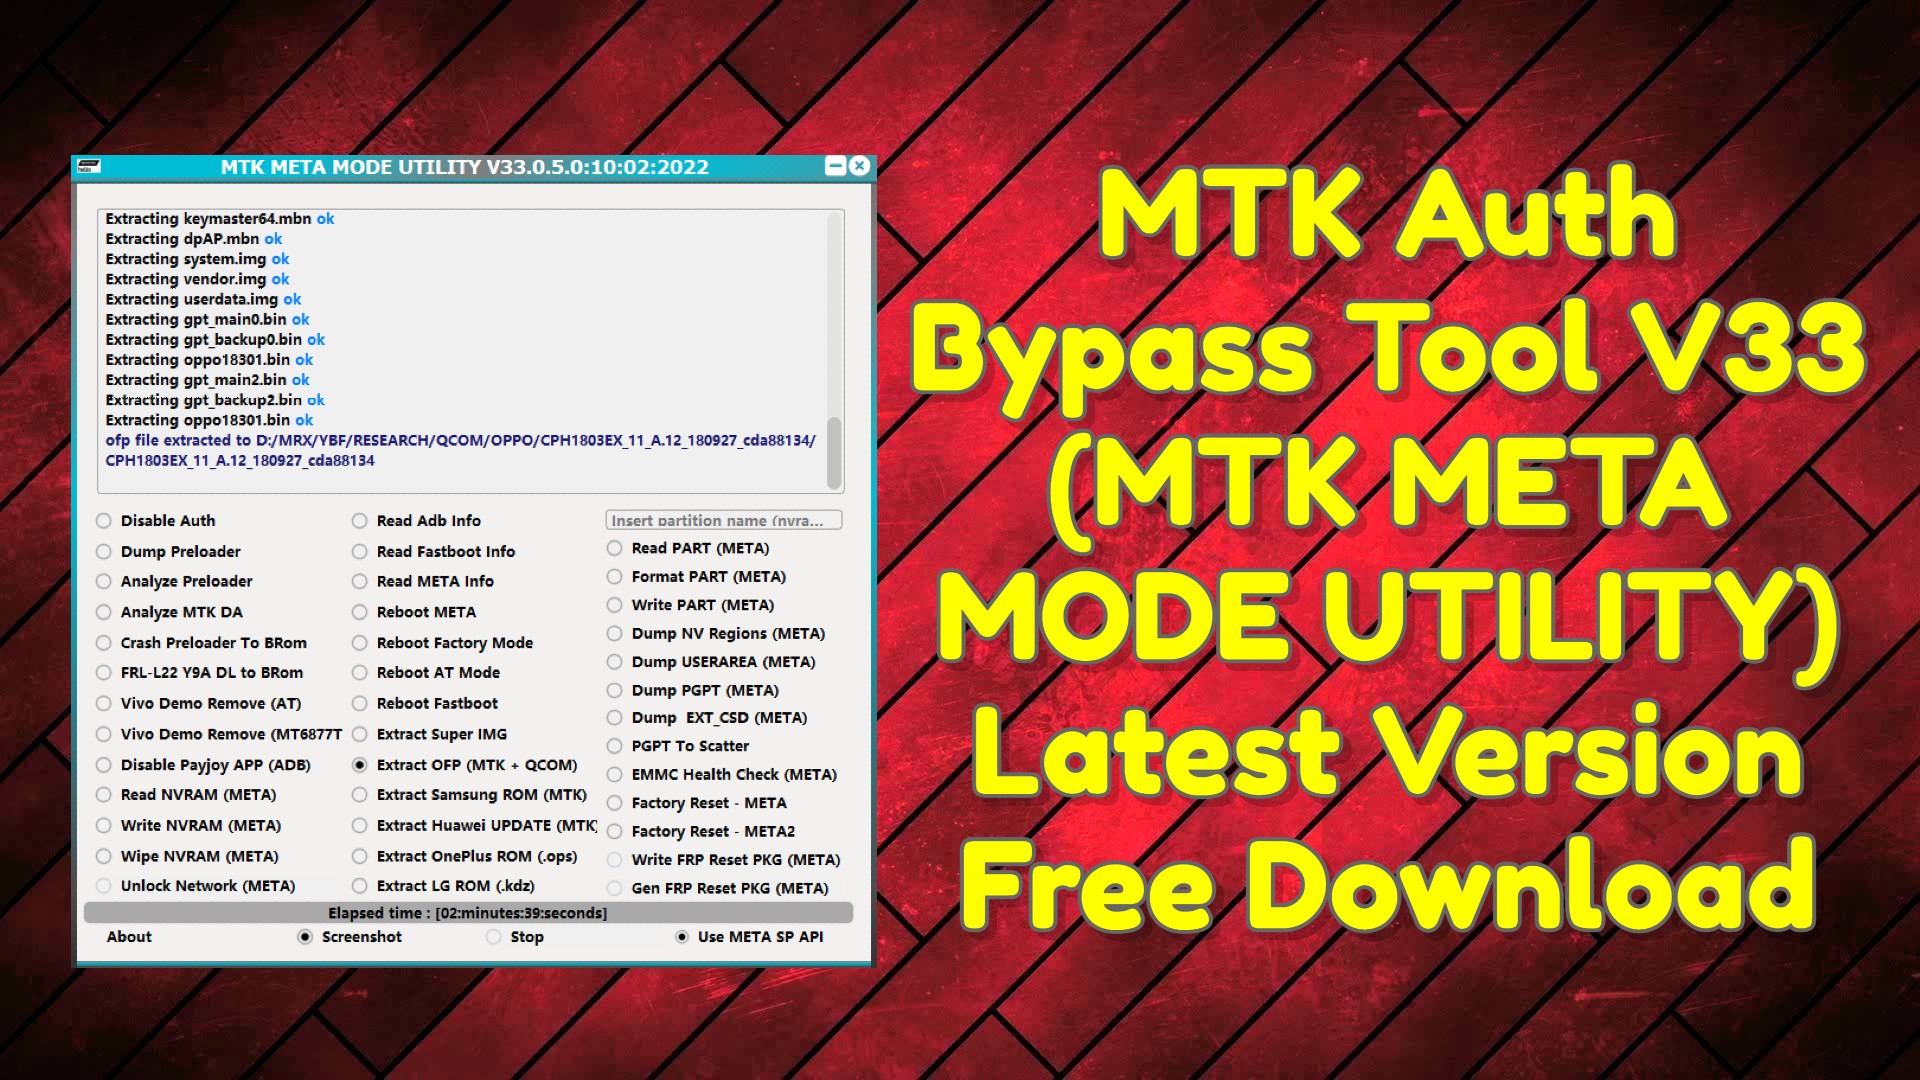 Mtk Auth Bypass Tool V33 Latest Free Download